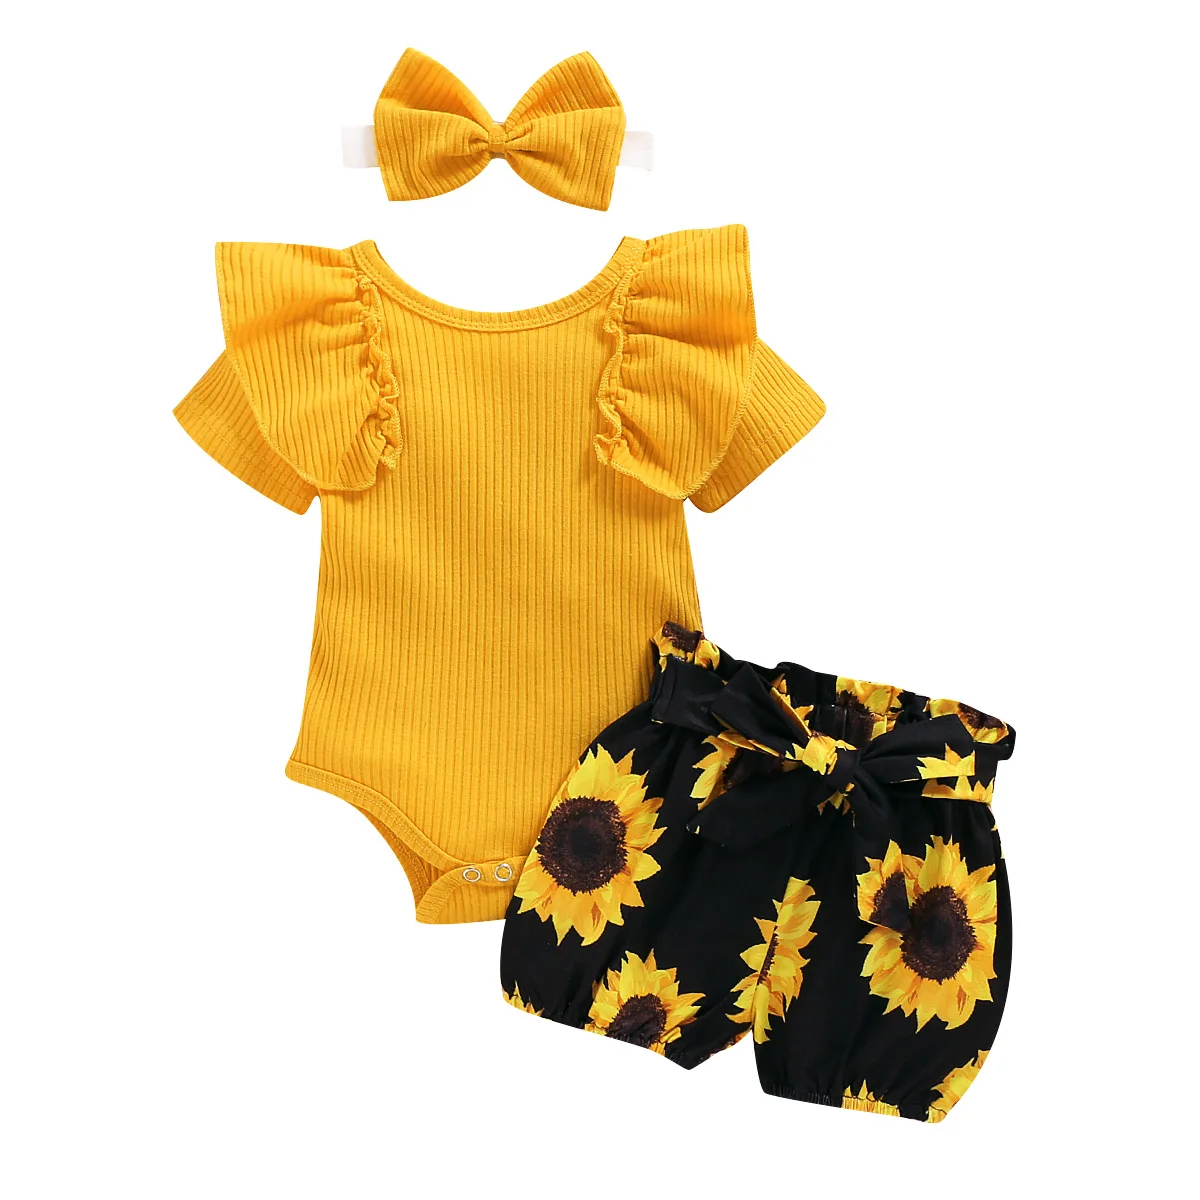 

Baby Girls Clothes Set Yellow Rib Knit Bodysuit Ruffles Romper Floral Sunflower Shorts Headband 0-24M Infant Toddler Outfit New